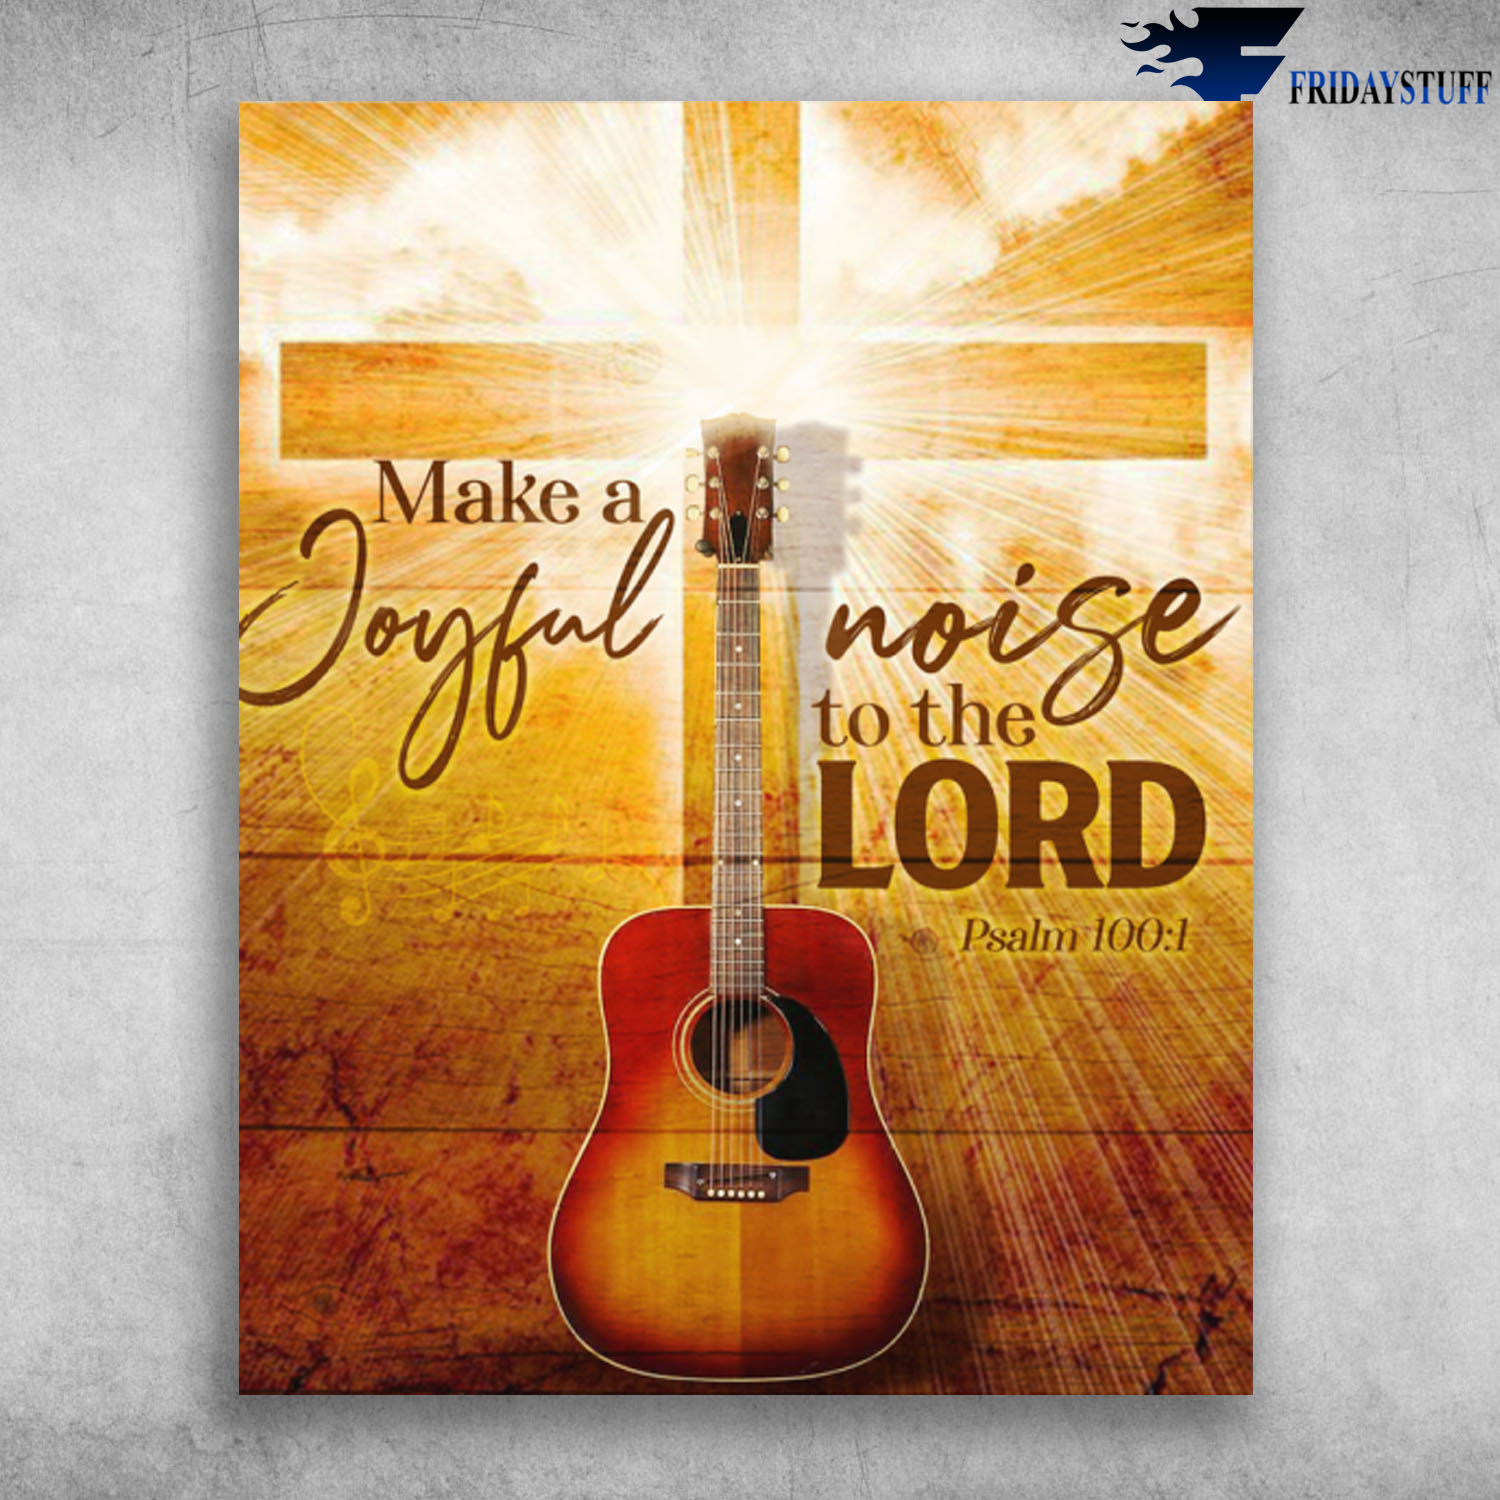 Christ Cross Guitar Musical Instrument Make A Joyful Noise To The Lord Psalm 100 1